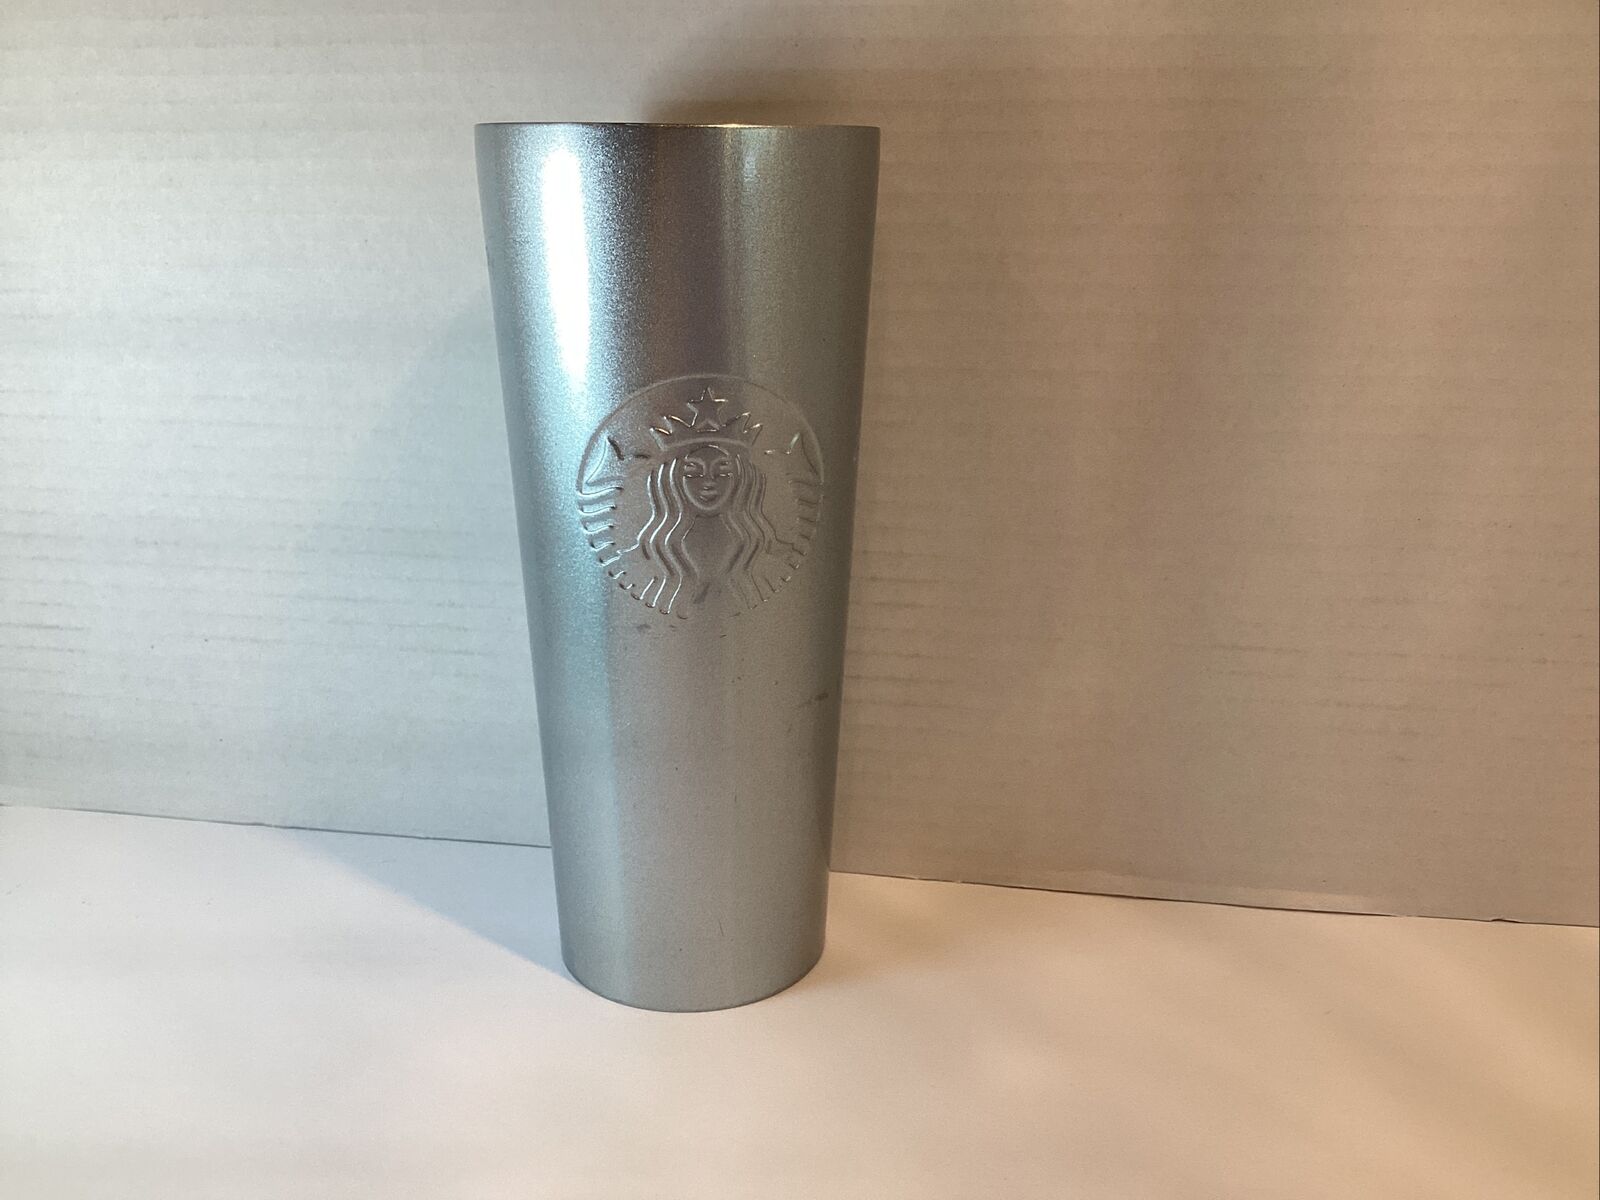 Starbucks Ice Pearl White Stainless Steel Cold Cup Tumble 16oz 